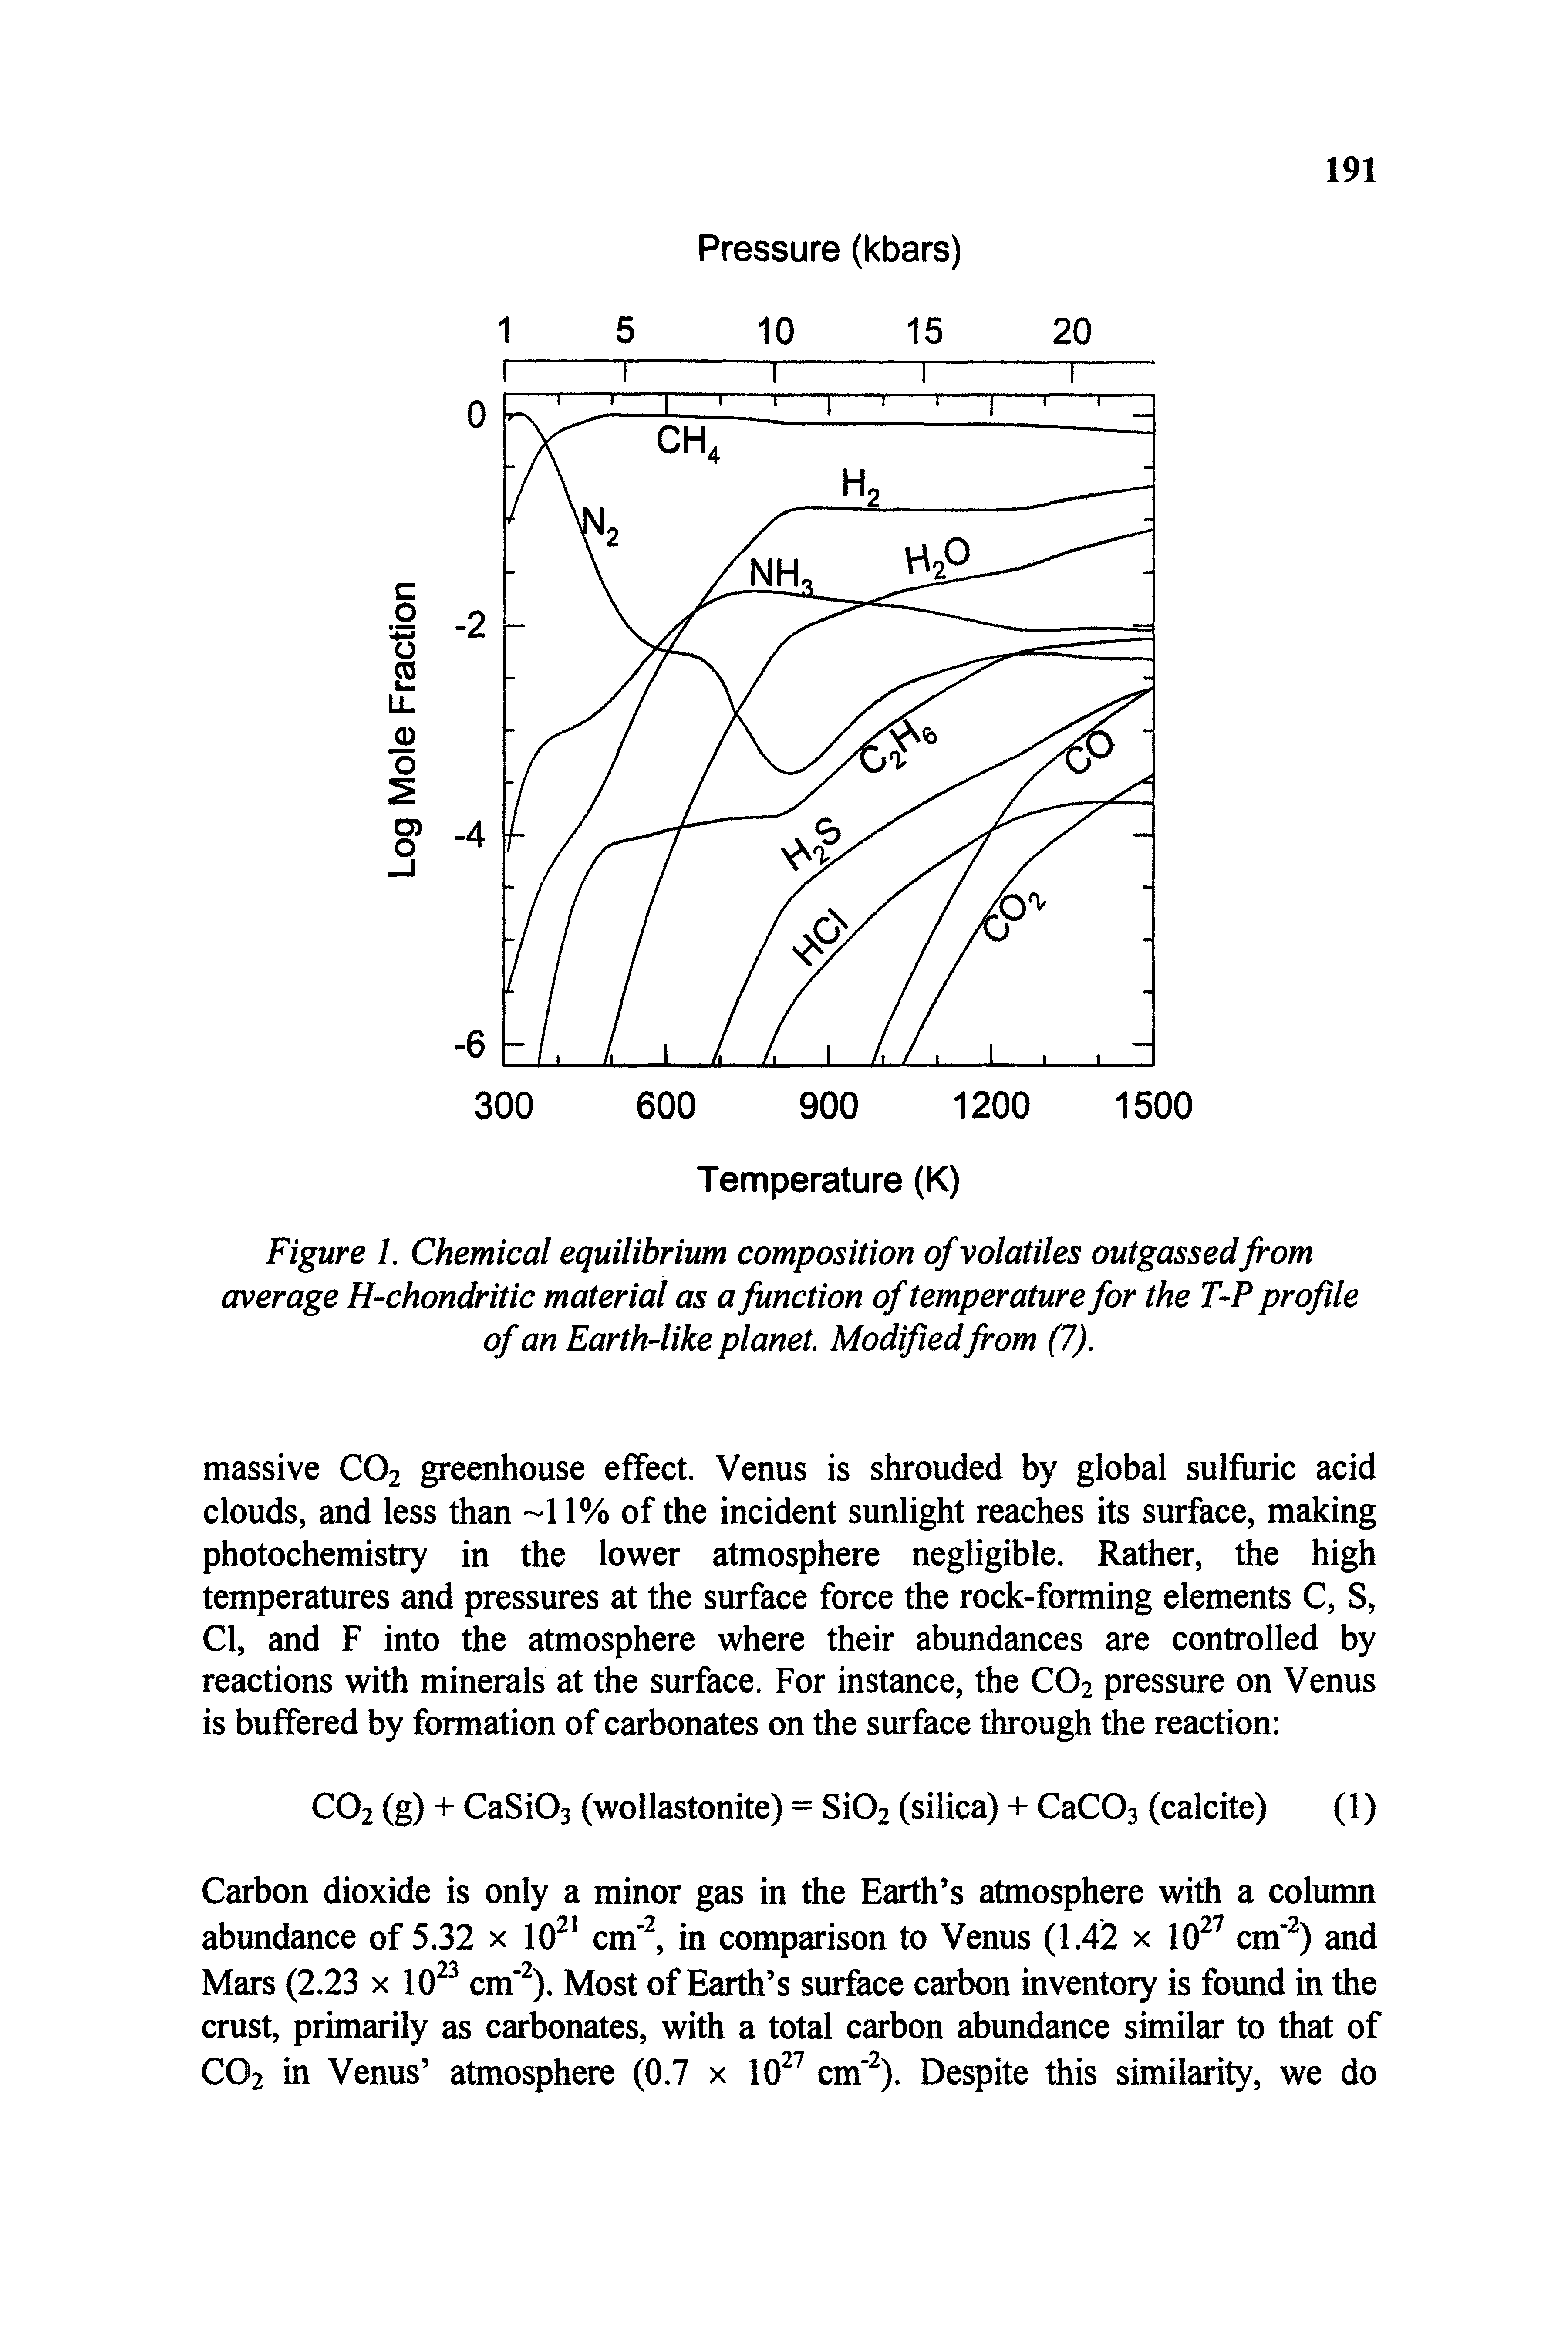 Figure 1. Chemical equilibrium composition of volatiles outgassedfrom average H-chondritic material as a function of temperature for the T-P profile of an Earth-like planet. Modifiedfrom (7).